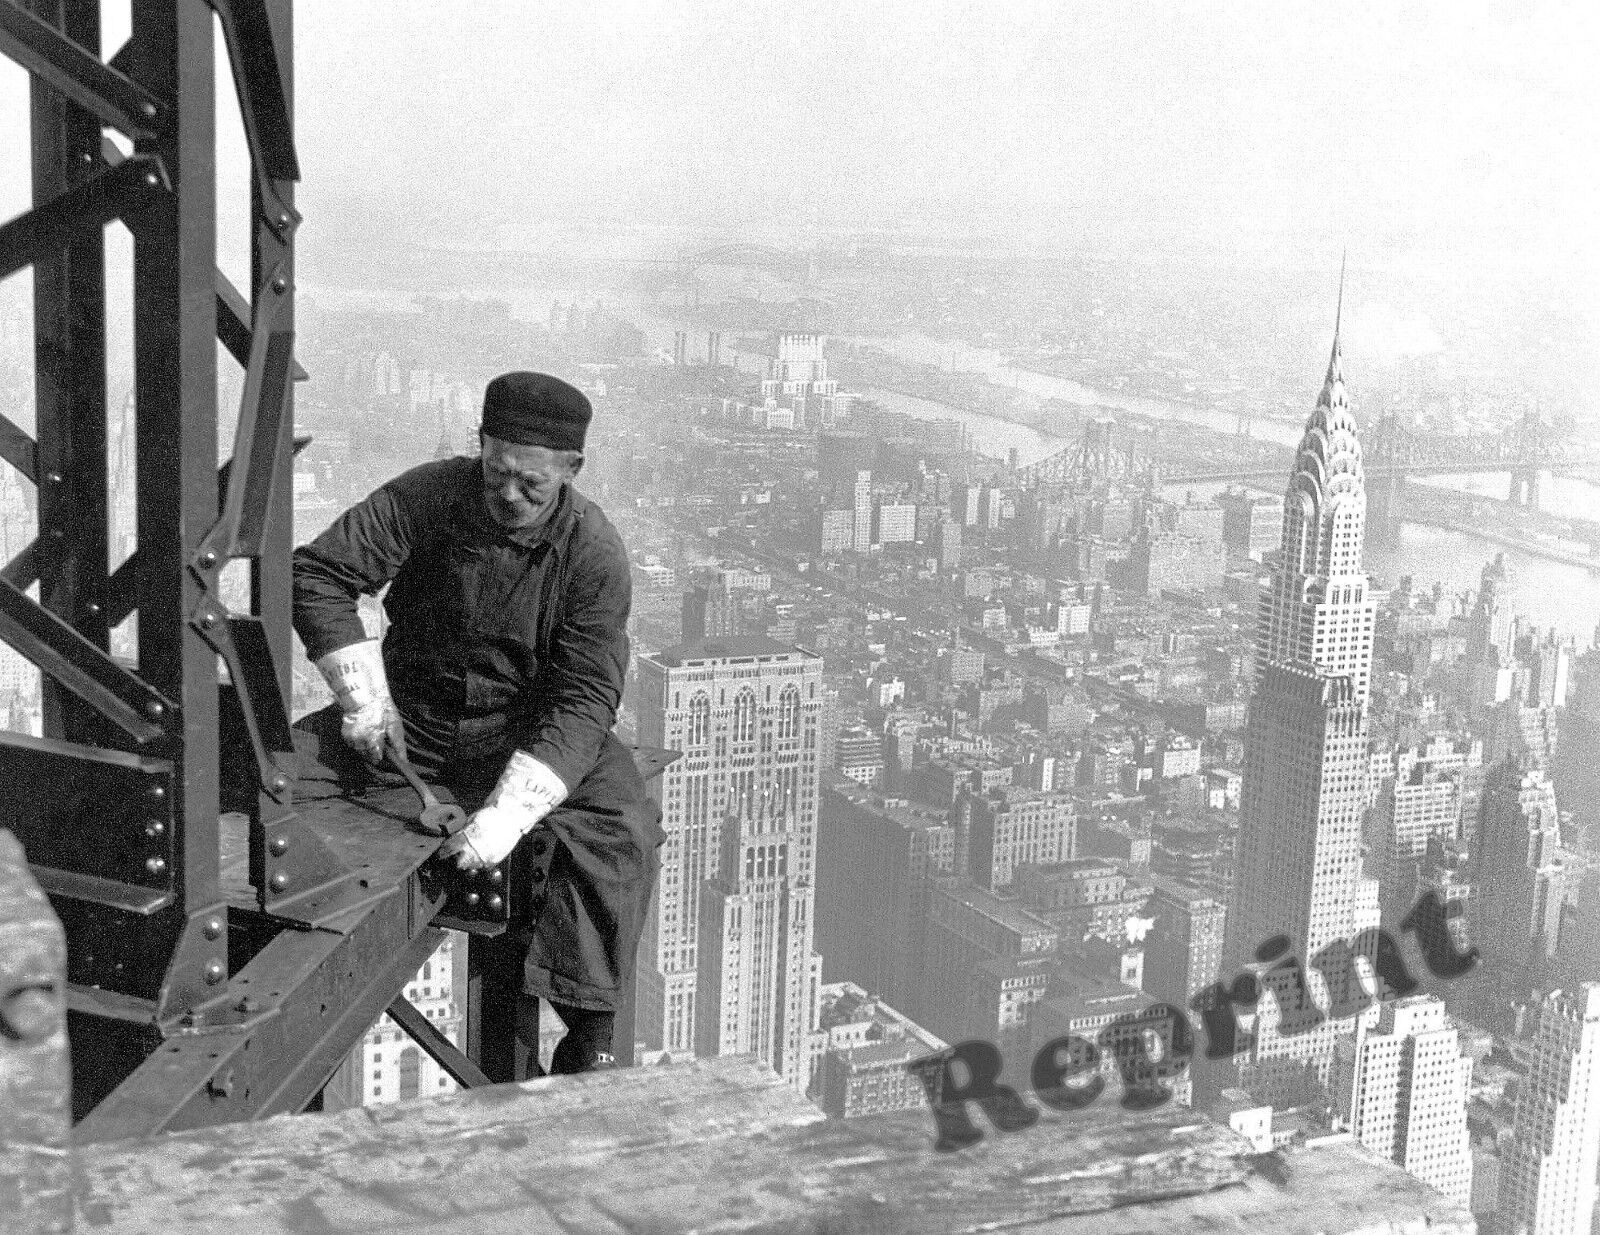 New York Empire State Building Under Construction Year 1930 8x10 Photo